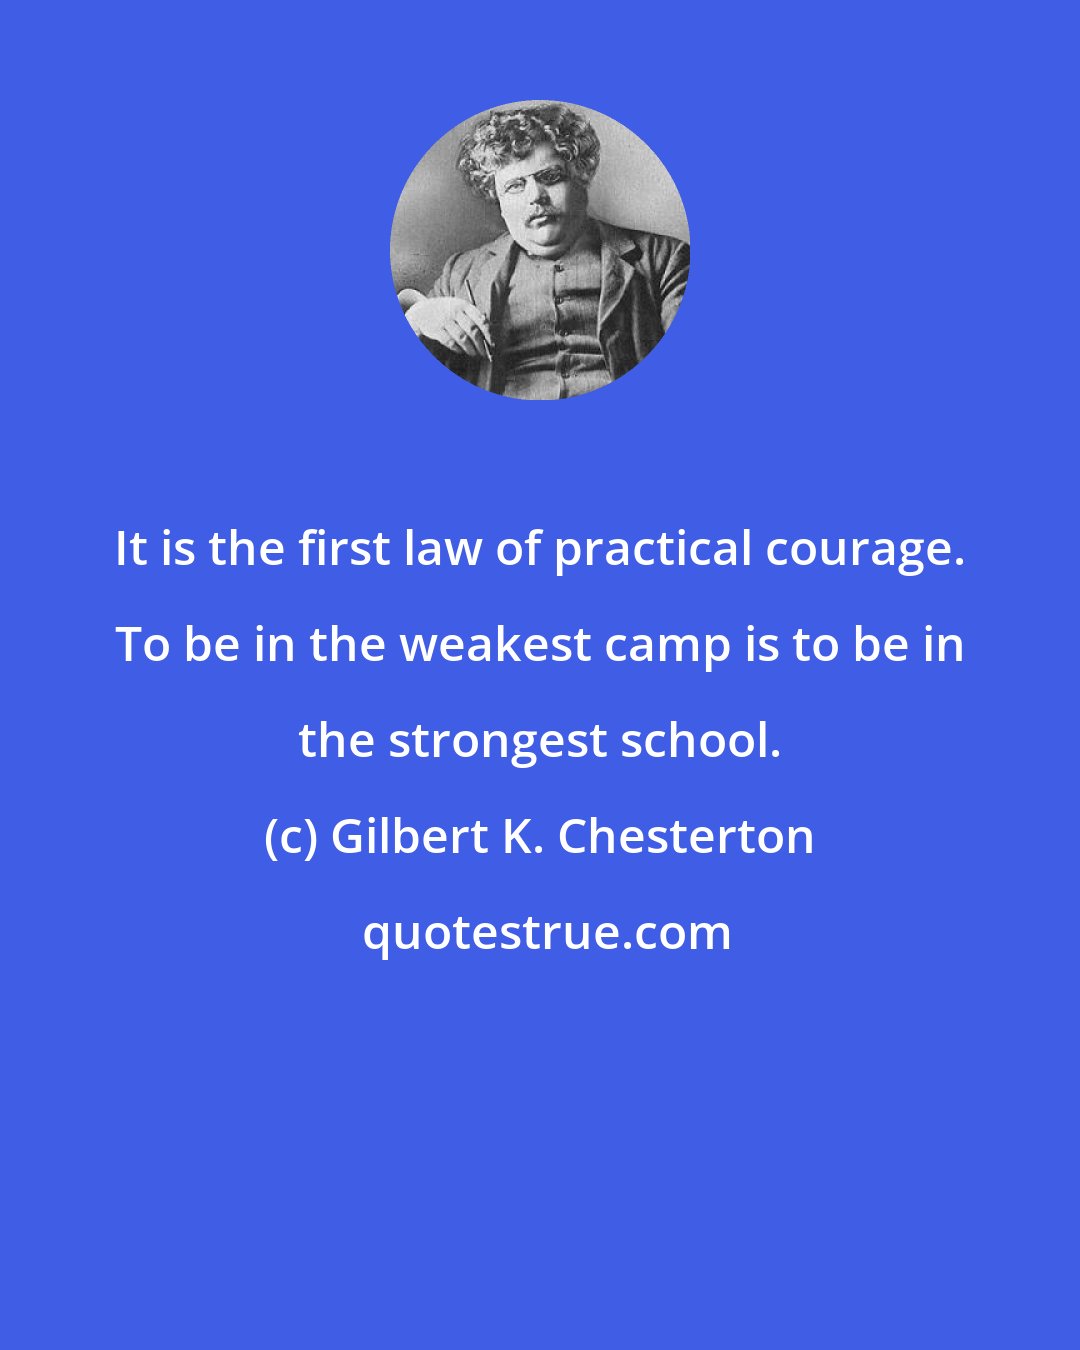 Gilbert K. Chesterton: It is the first law of practical courage. To be in the weakest camp is to be in the strongest school.